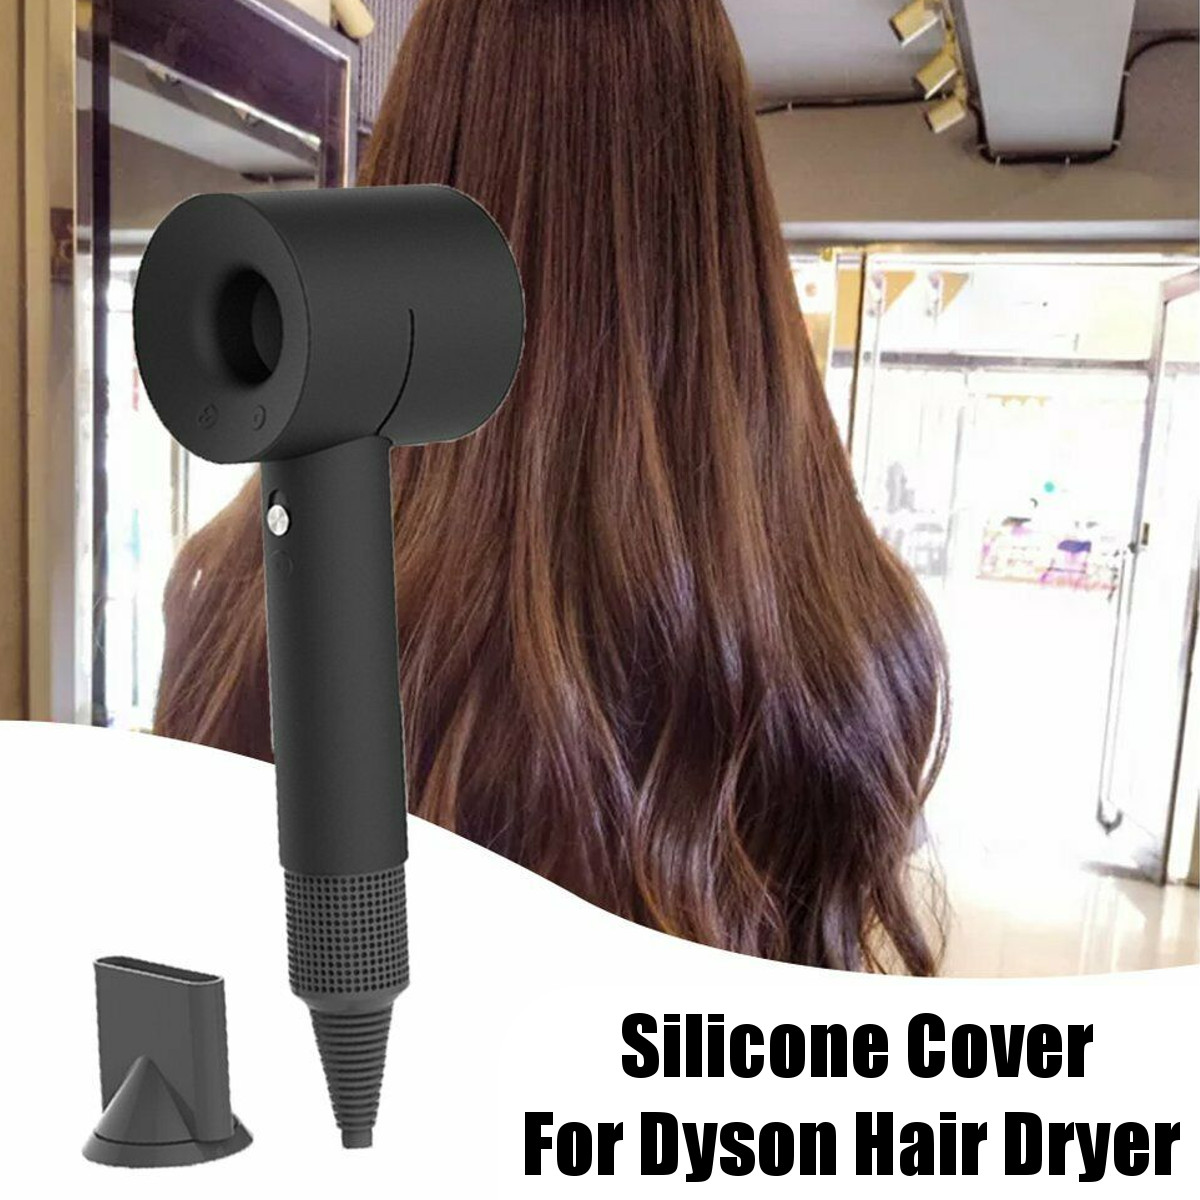 Soft Silicone Case Cover Hair Dryer Dustproof Protective Anti-scratch Cover For Dyson